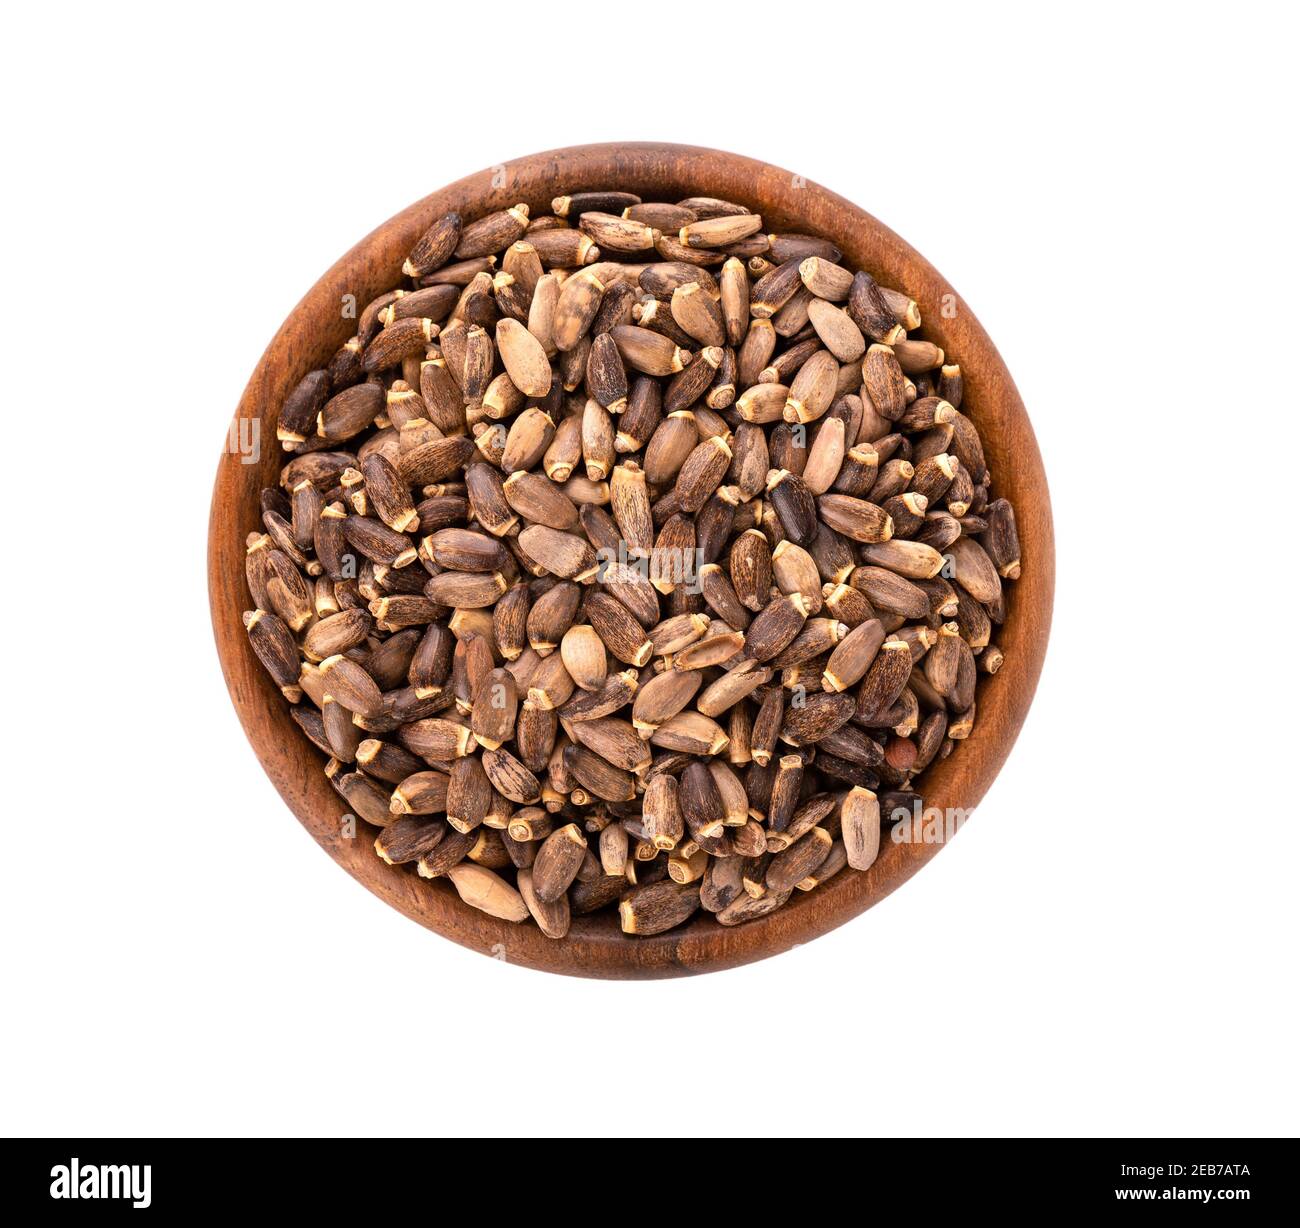 Milk Thistle seed in wooden bowl, isolated on white background. Silybum marianum, Scotch Thistle or Marian Thistle. Top view. Stock Photo